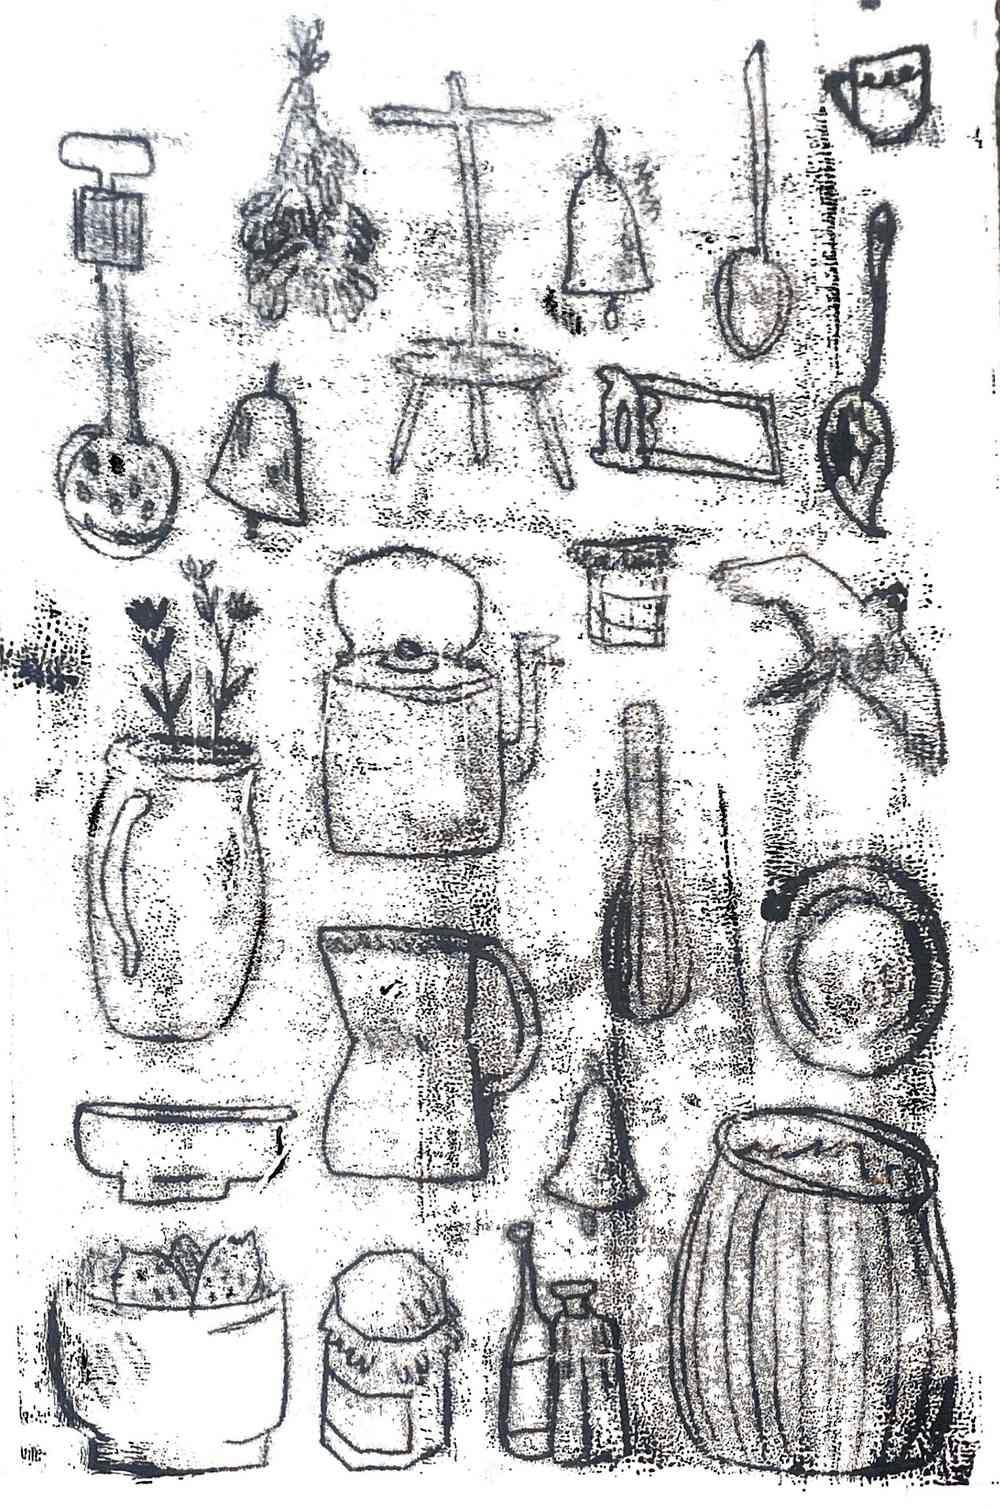 A series of charcoal sketches of household items including a kettle, jug, spoon, jam, bowl, saw, bell and a teacup.